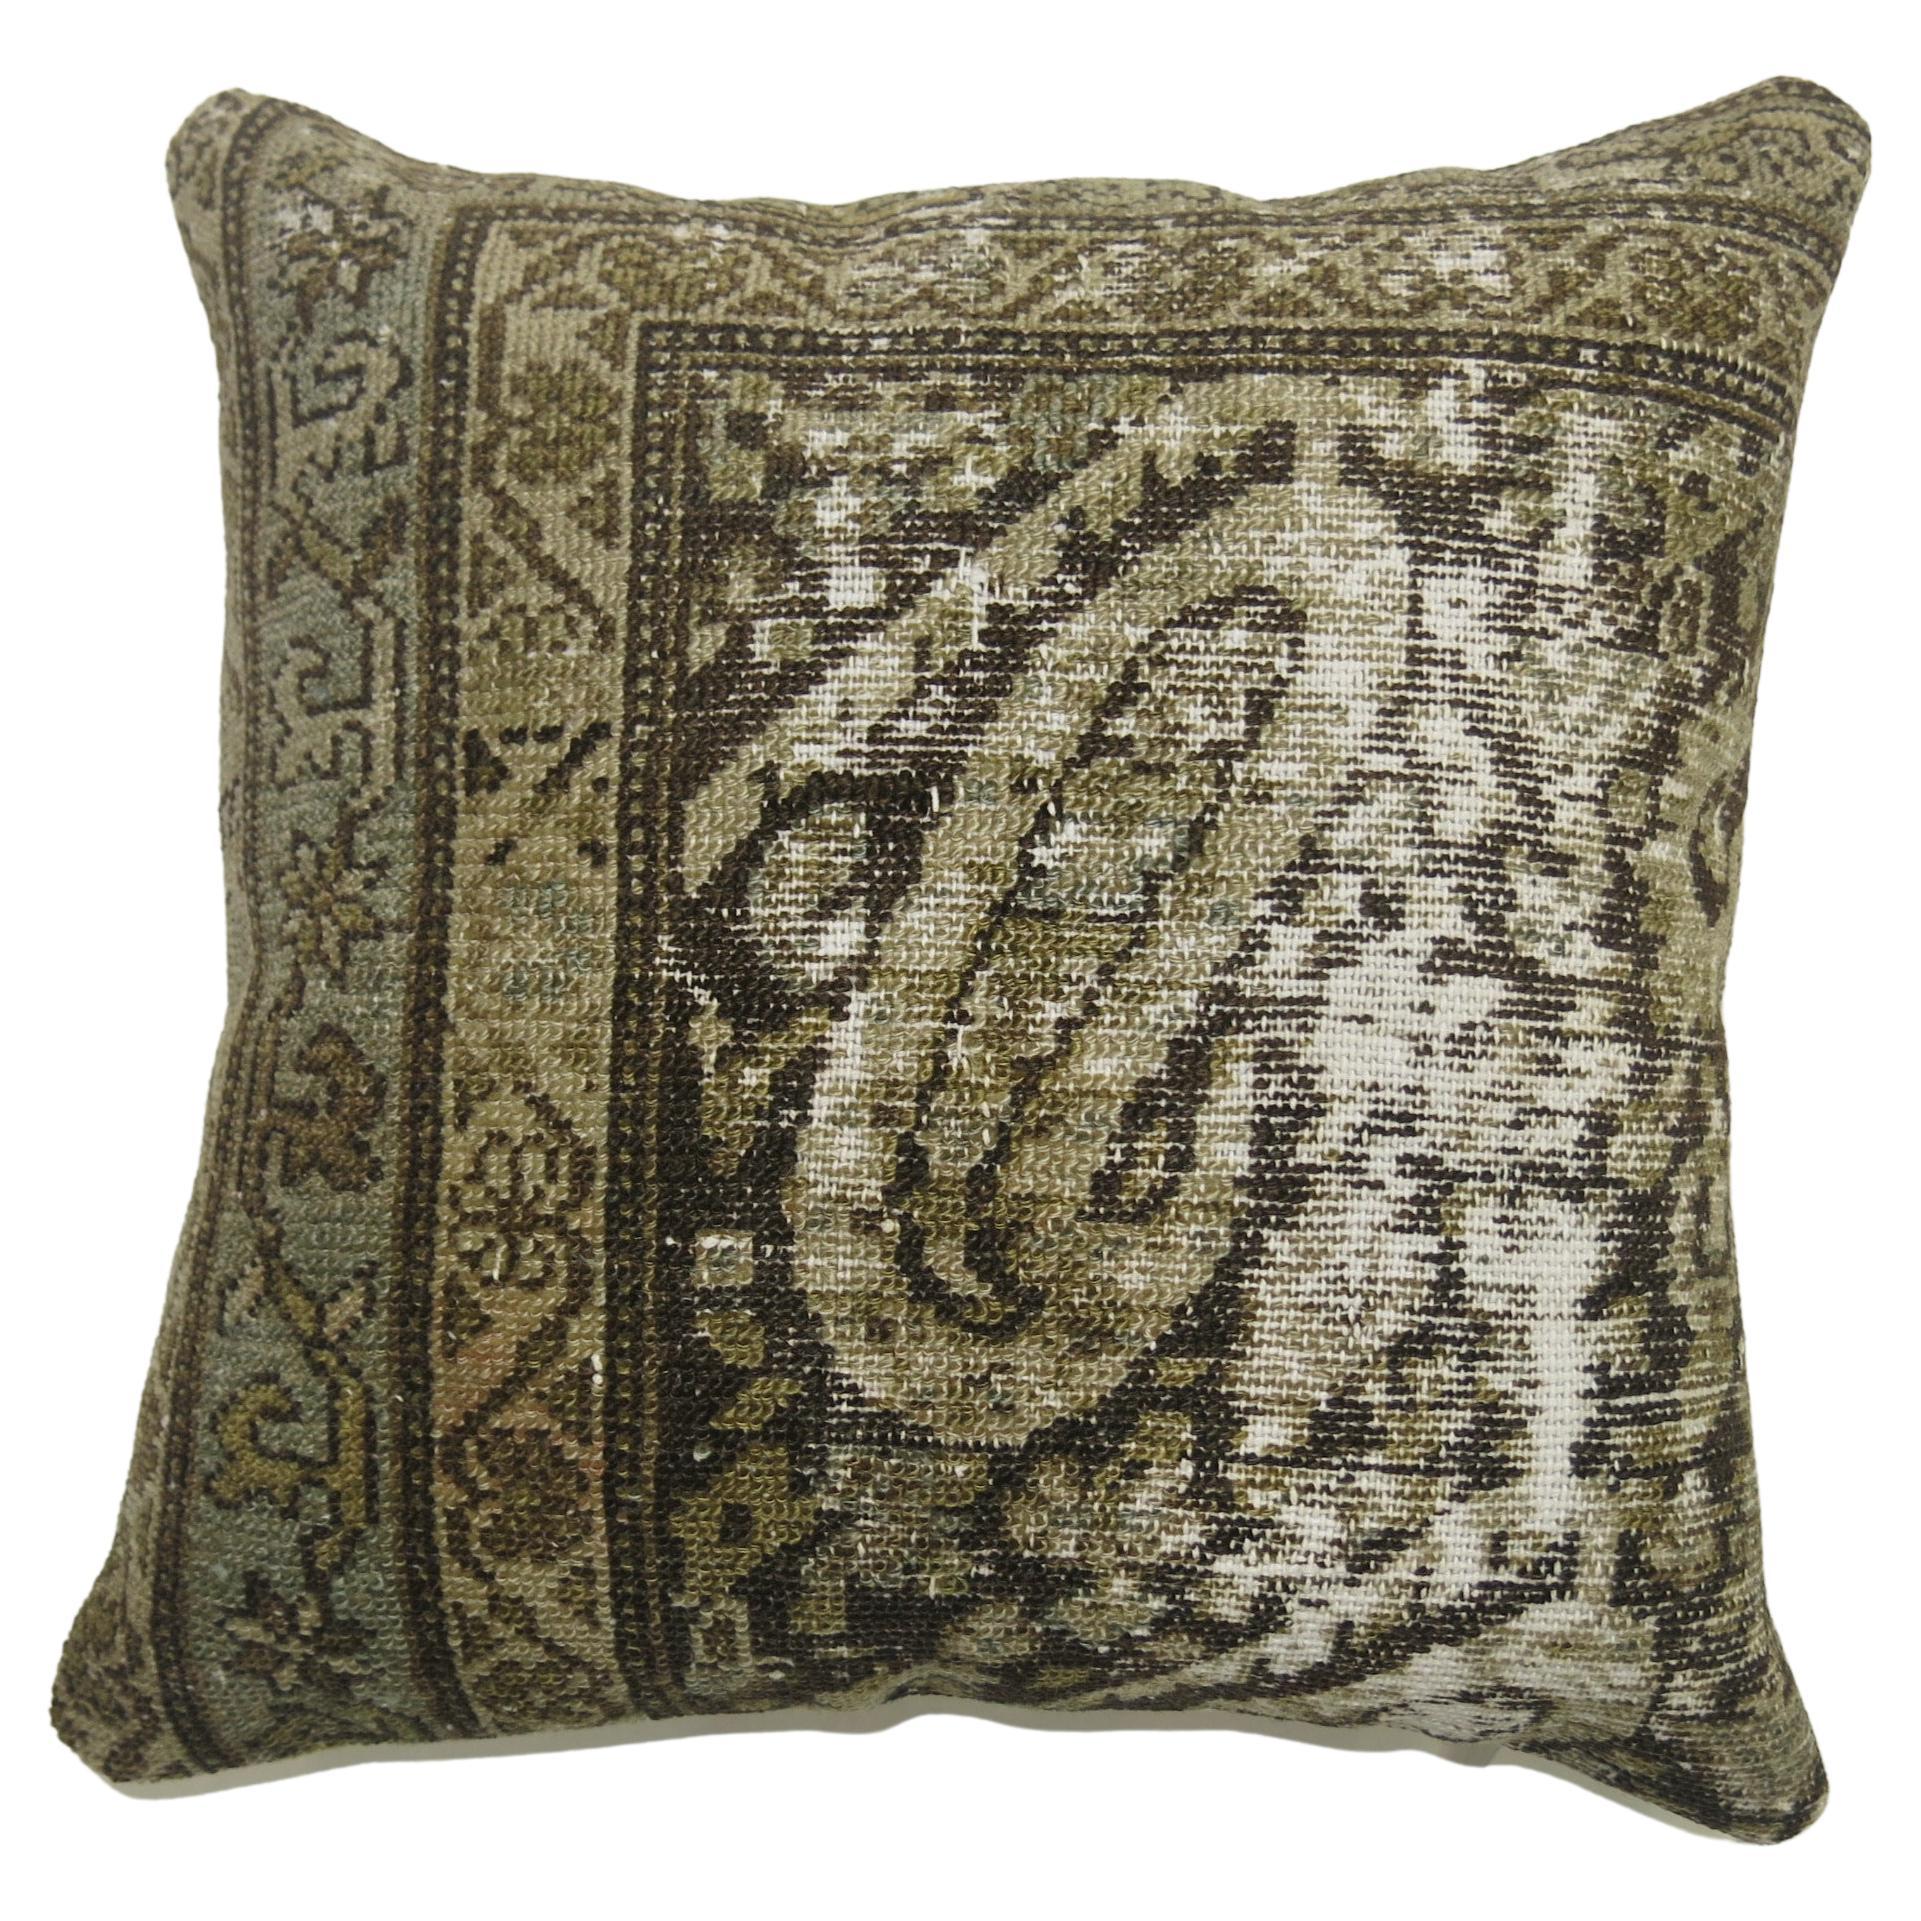 Pillow made from an antique worn Persian Malayer rug.

Measures: 16'' x 16''.